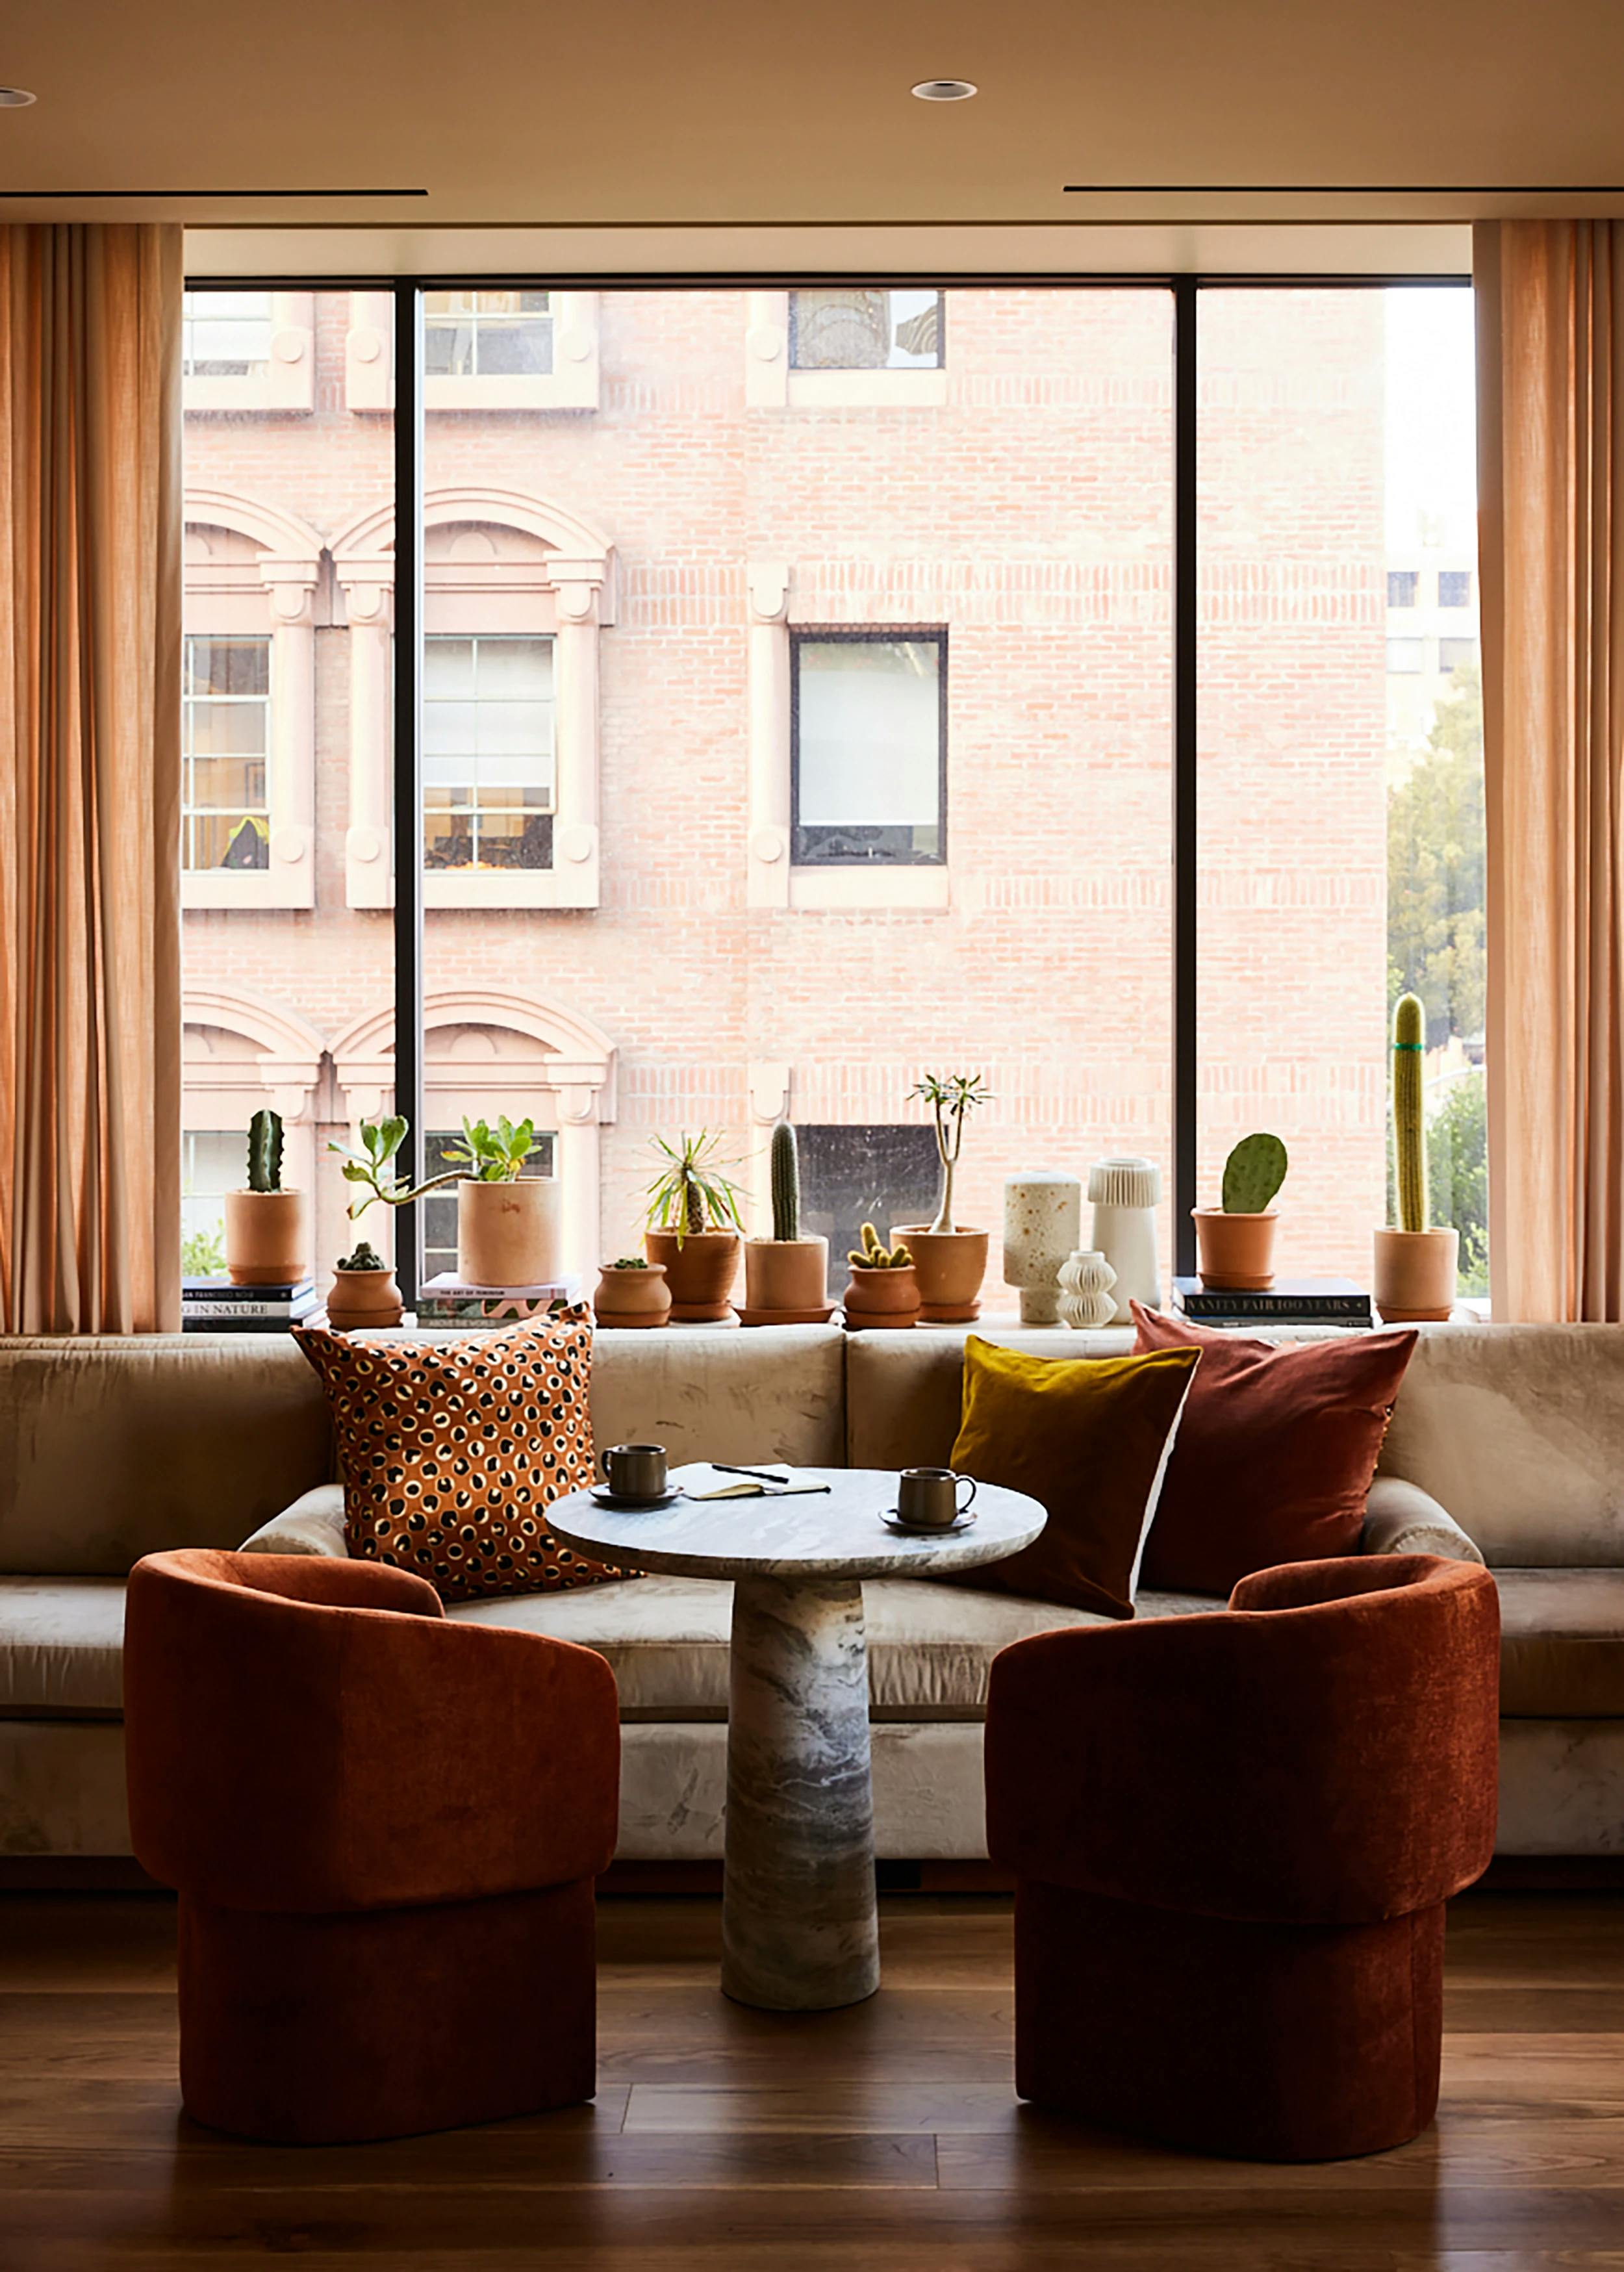 A lounge area at the Chief San Francisco Clubhouse, featuring a sofa and two red armchairs in front of a large window with potted plants on the windowsill.